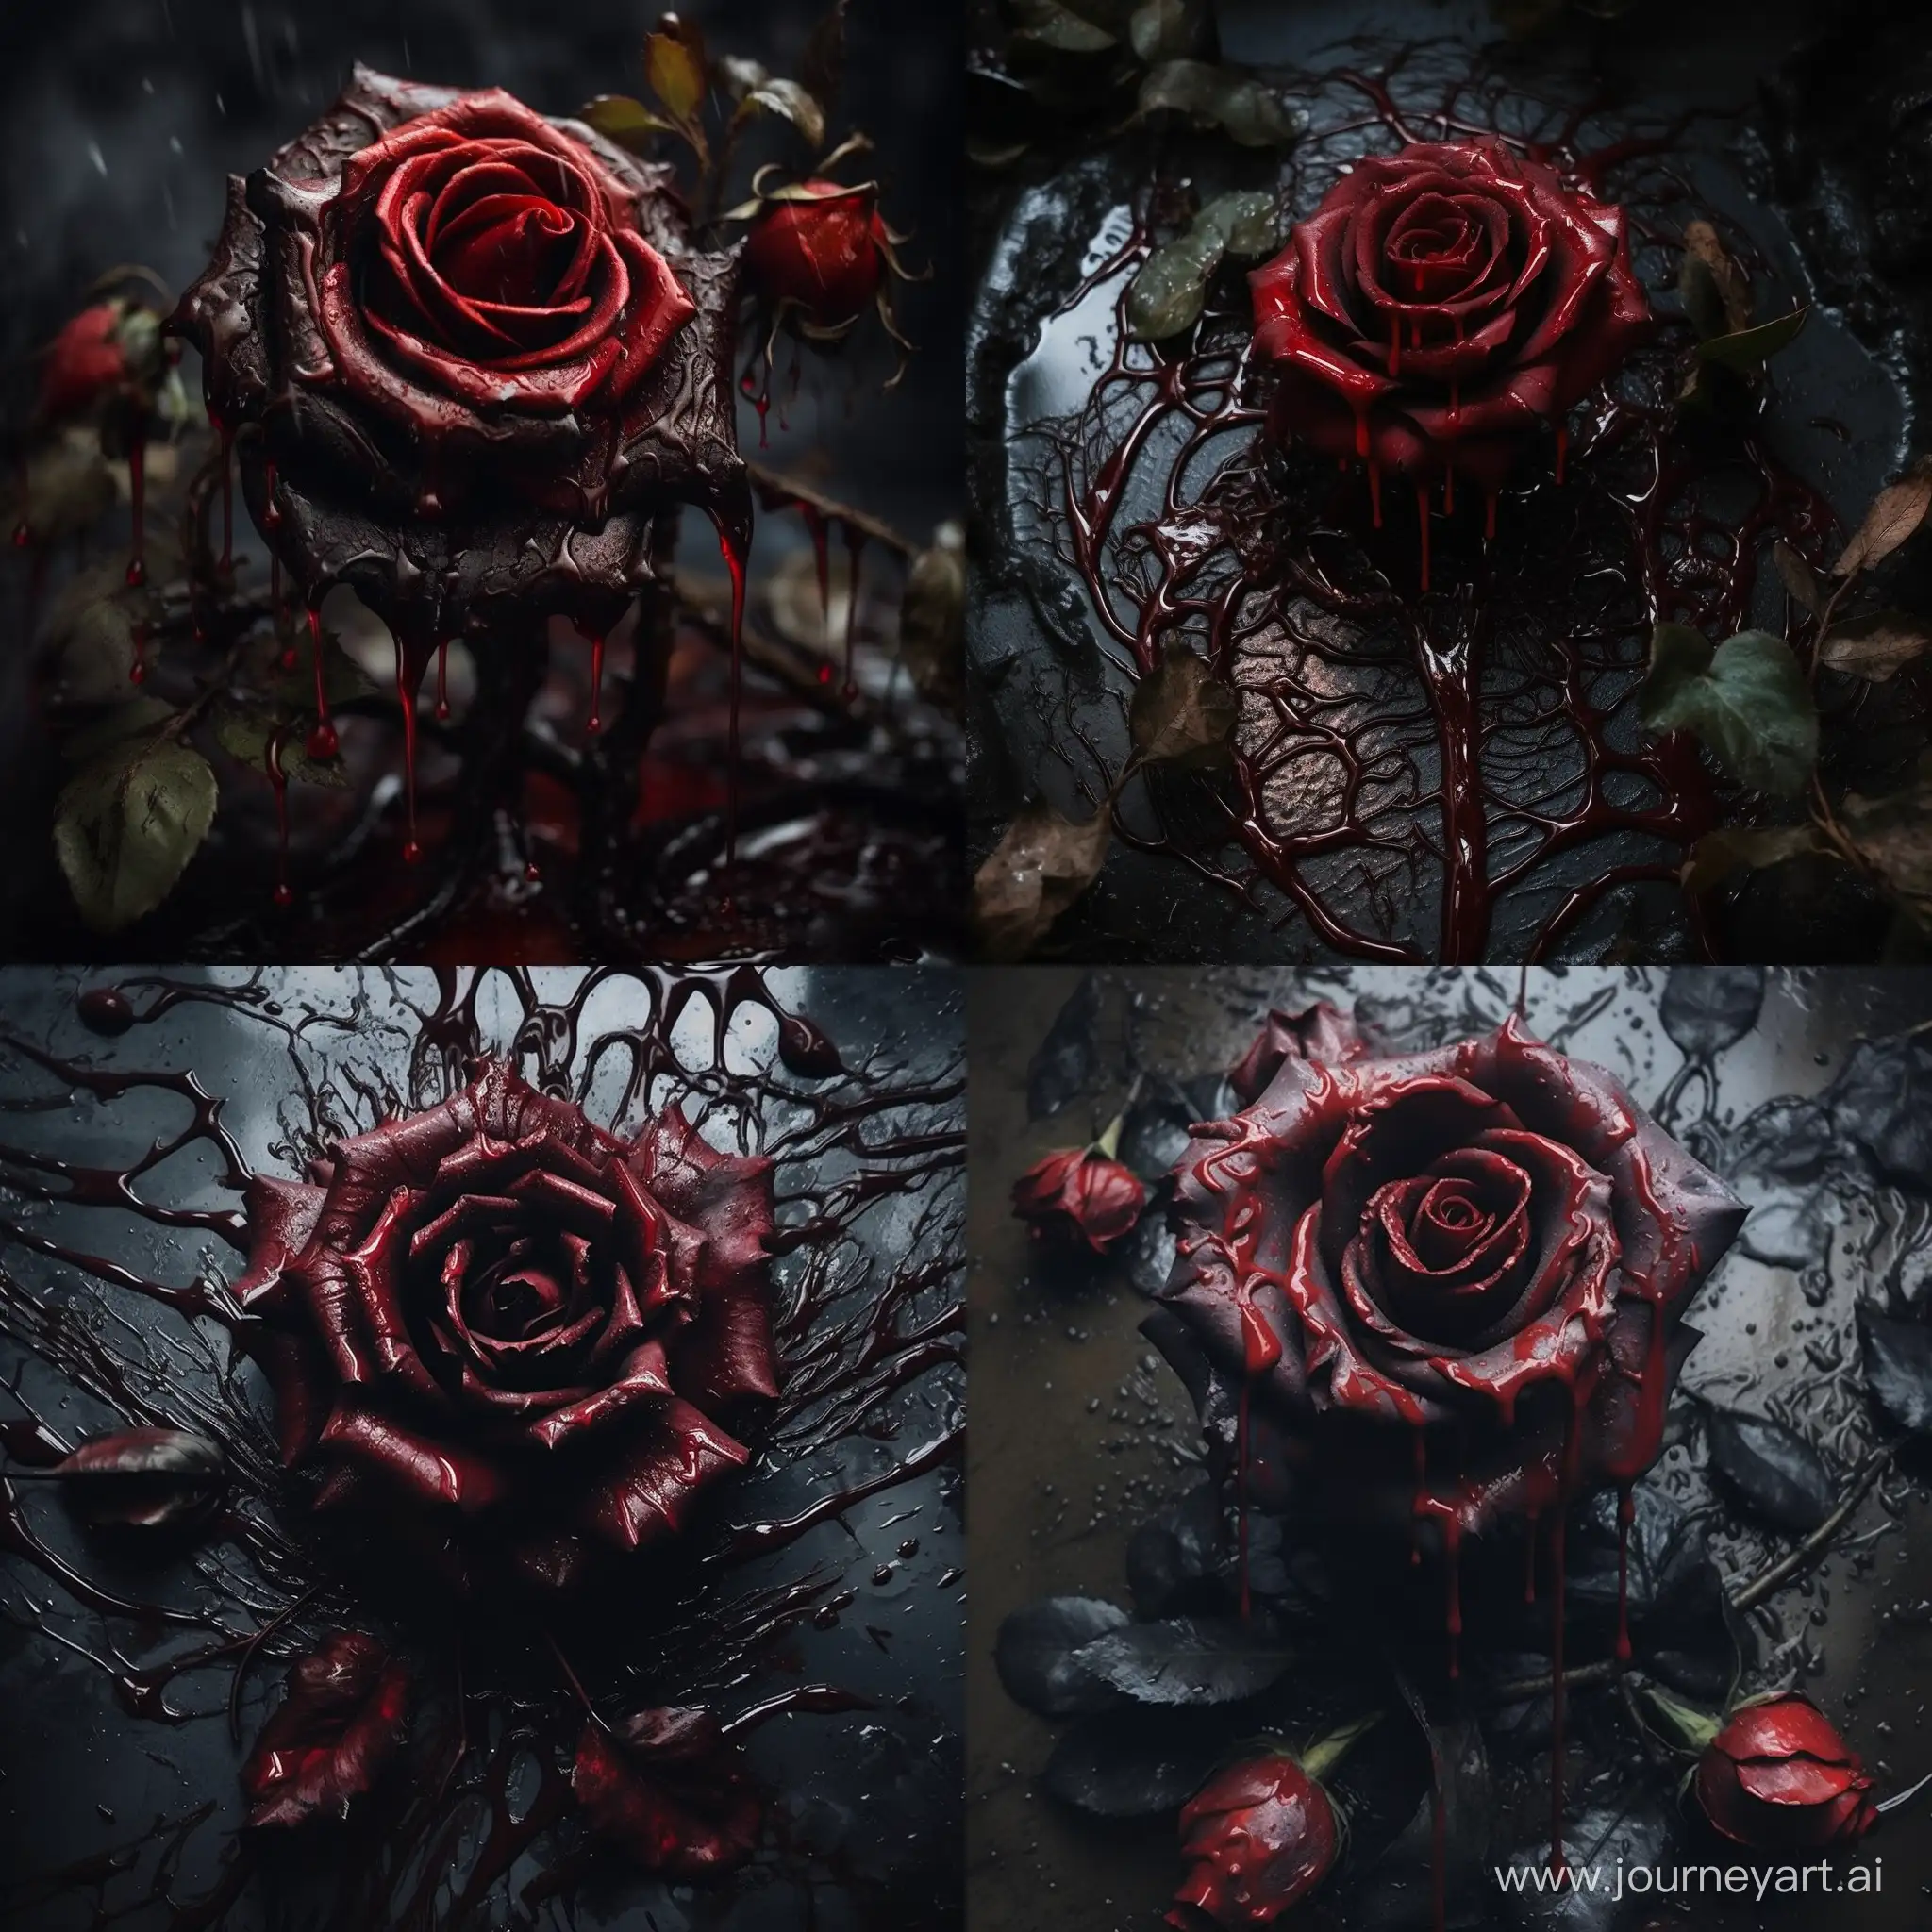 Dark-Symbolism-BloodSoaked-Rose-in-Shadowy-Ambiance